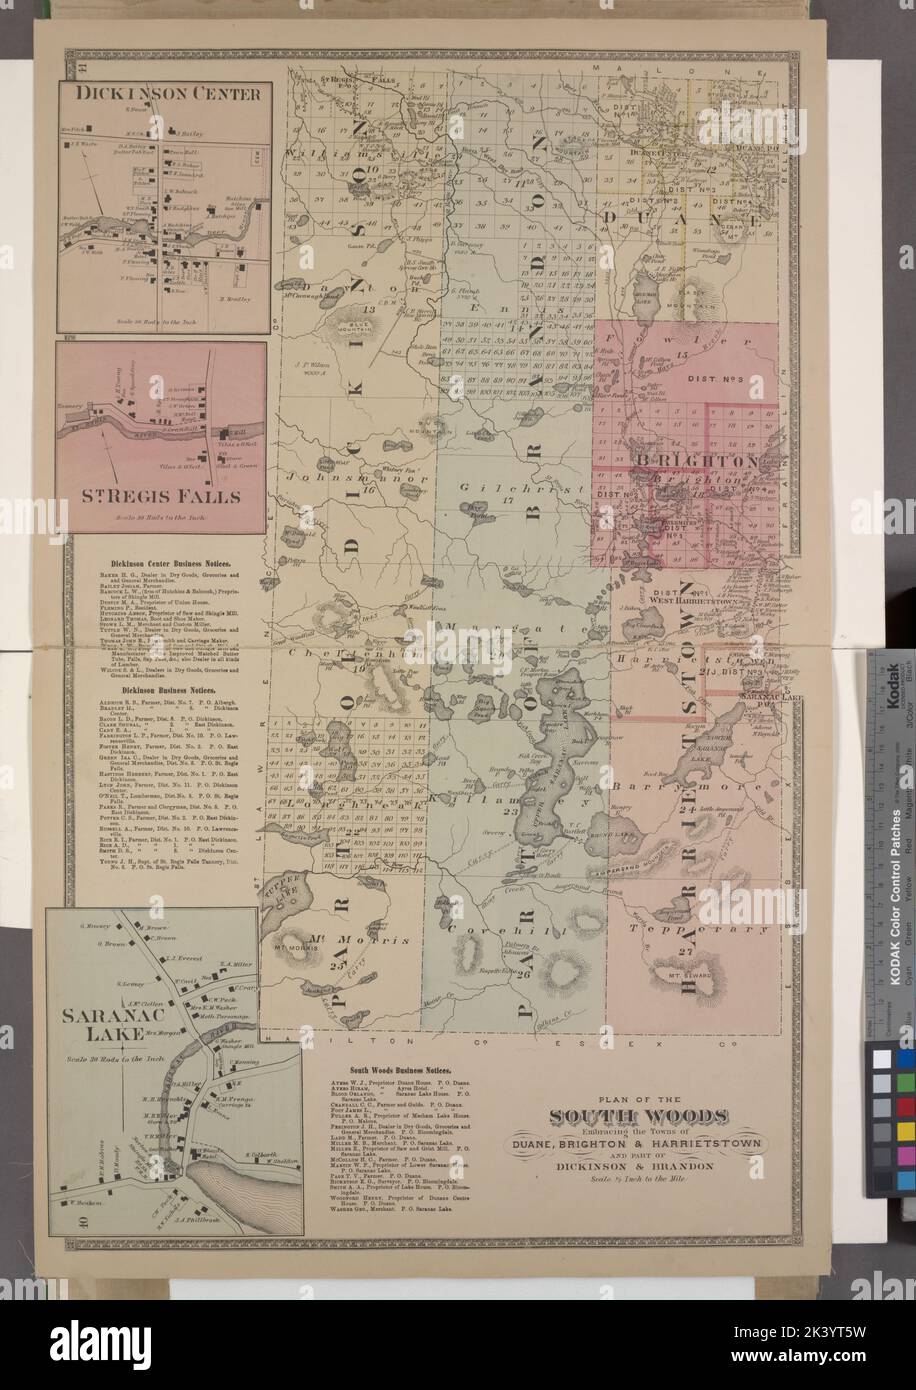 Dickinson Center Village; St. Regis Falls Village; Dickinson Center Business Notices. ; Dickinson Business Notices. ; Saranac Lake Village; South Woods Business Notices. ; Plan of the South Woods Embracing the Towns of Duane, Brighton, & Harrietstown and part of Dickinson & Brandon Cartographic. Atlases, Maps. 1876. Lionel Pincus and Princess Firyal Map Division. Franklin County (N.Y.), Real property , New York (State) Stock Photo